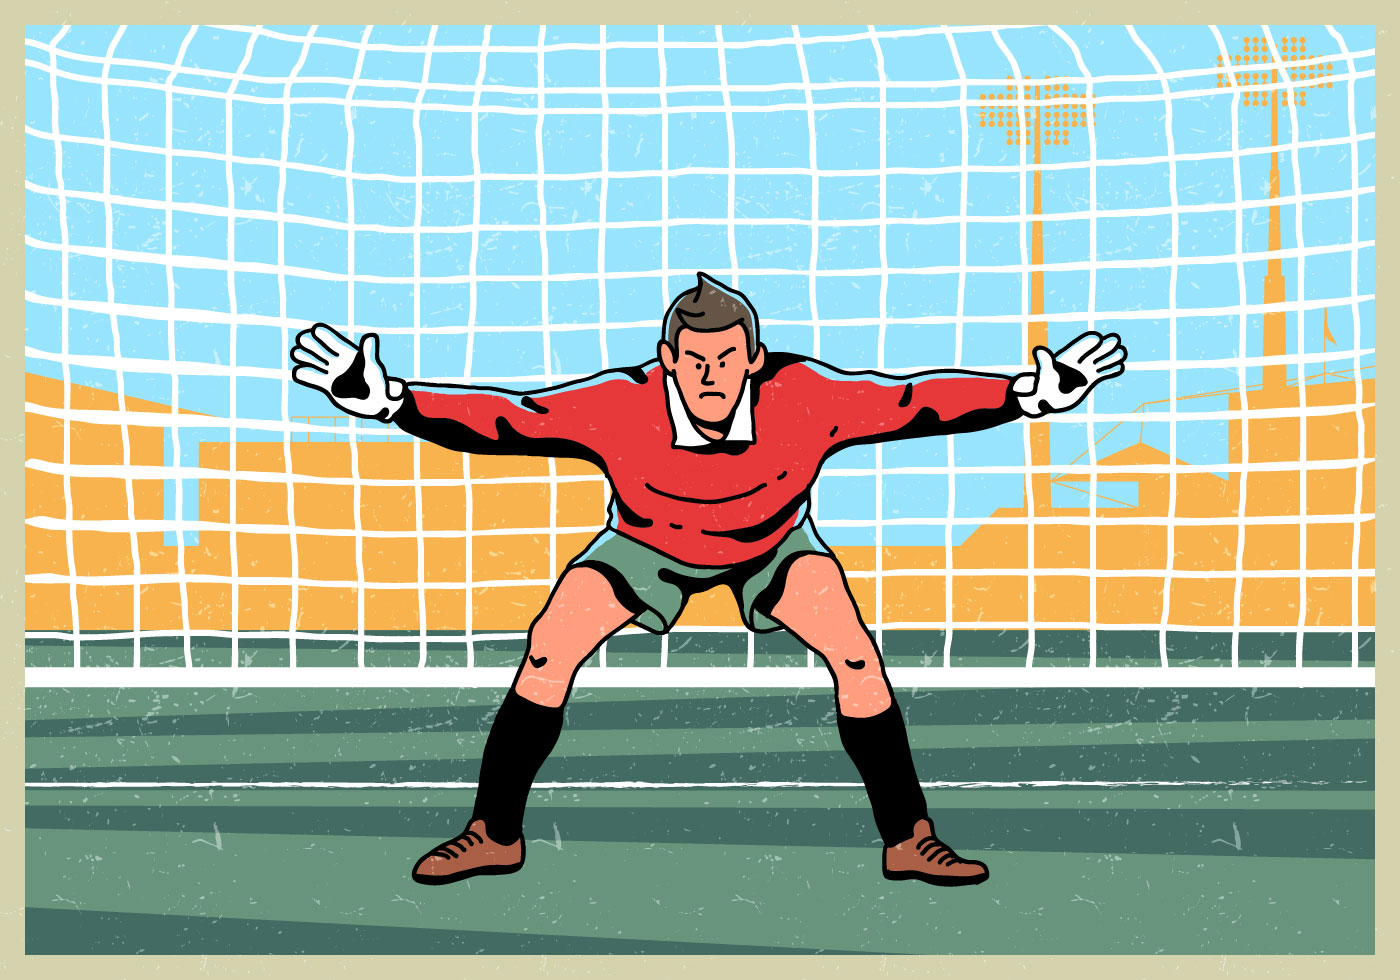 Browse 471 incredible Goalie vectors, icons, clipart graphics, and backgrou...